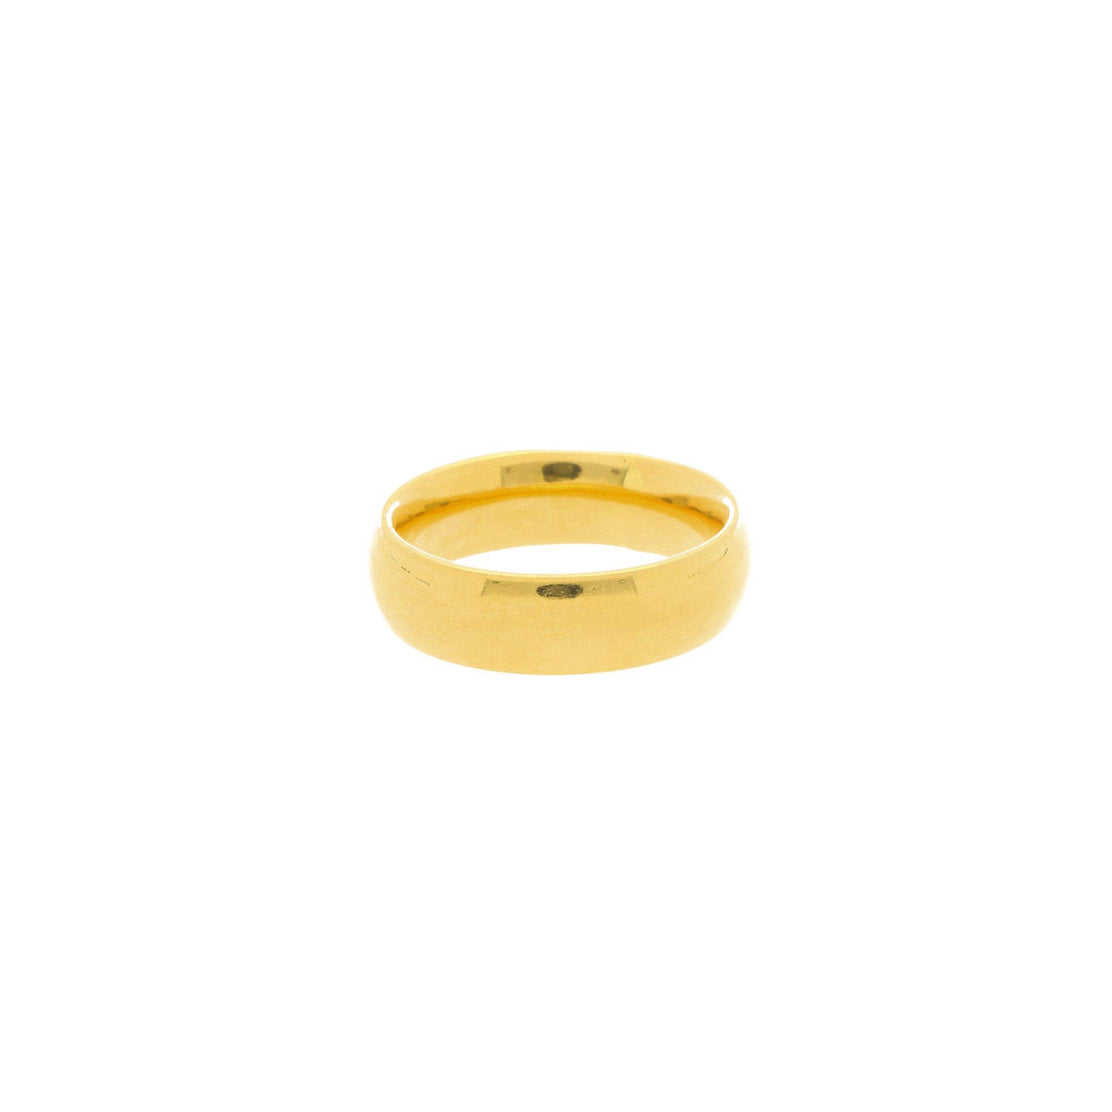 916 Kdm Flower Women Gold Ring, 10.930 Grams at Rs 60984.00 in Hyderabad |  ID: 23252289991